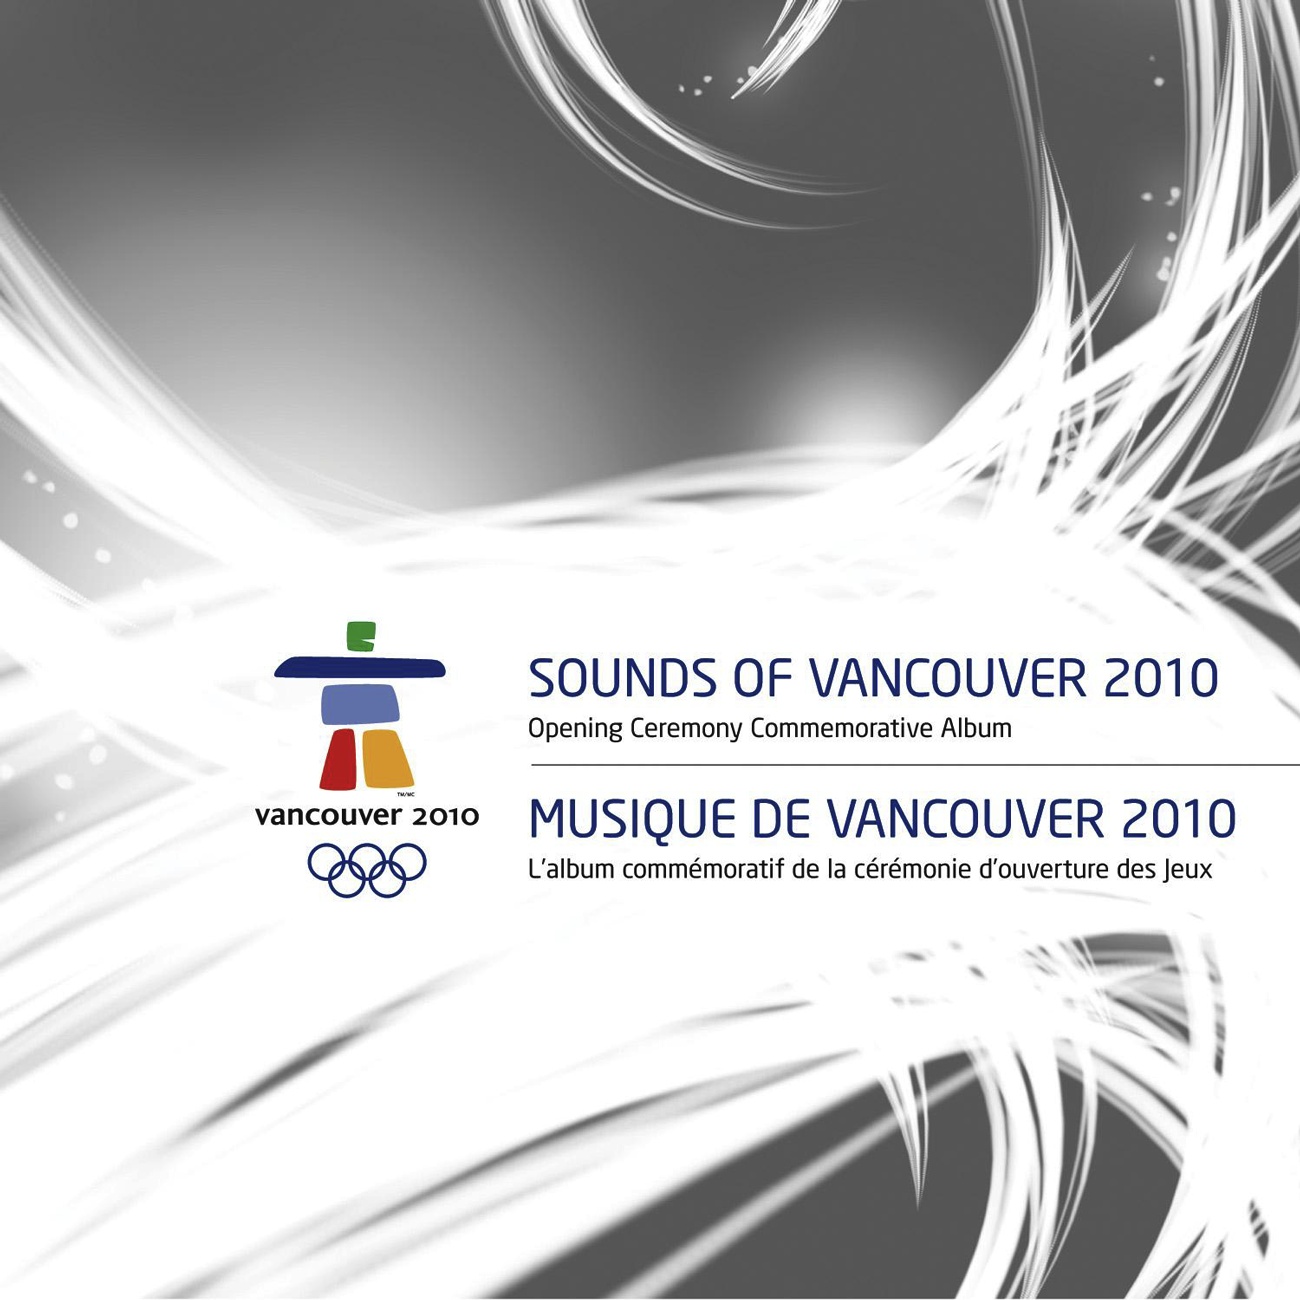 Sounds of Vancouver 2010: Opening Ceremony Commemorative Album